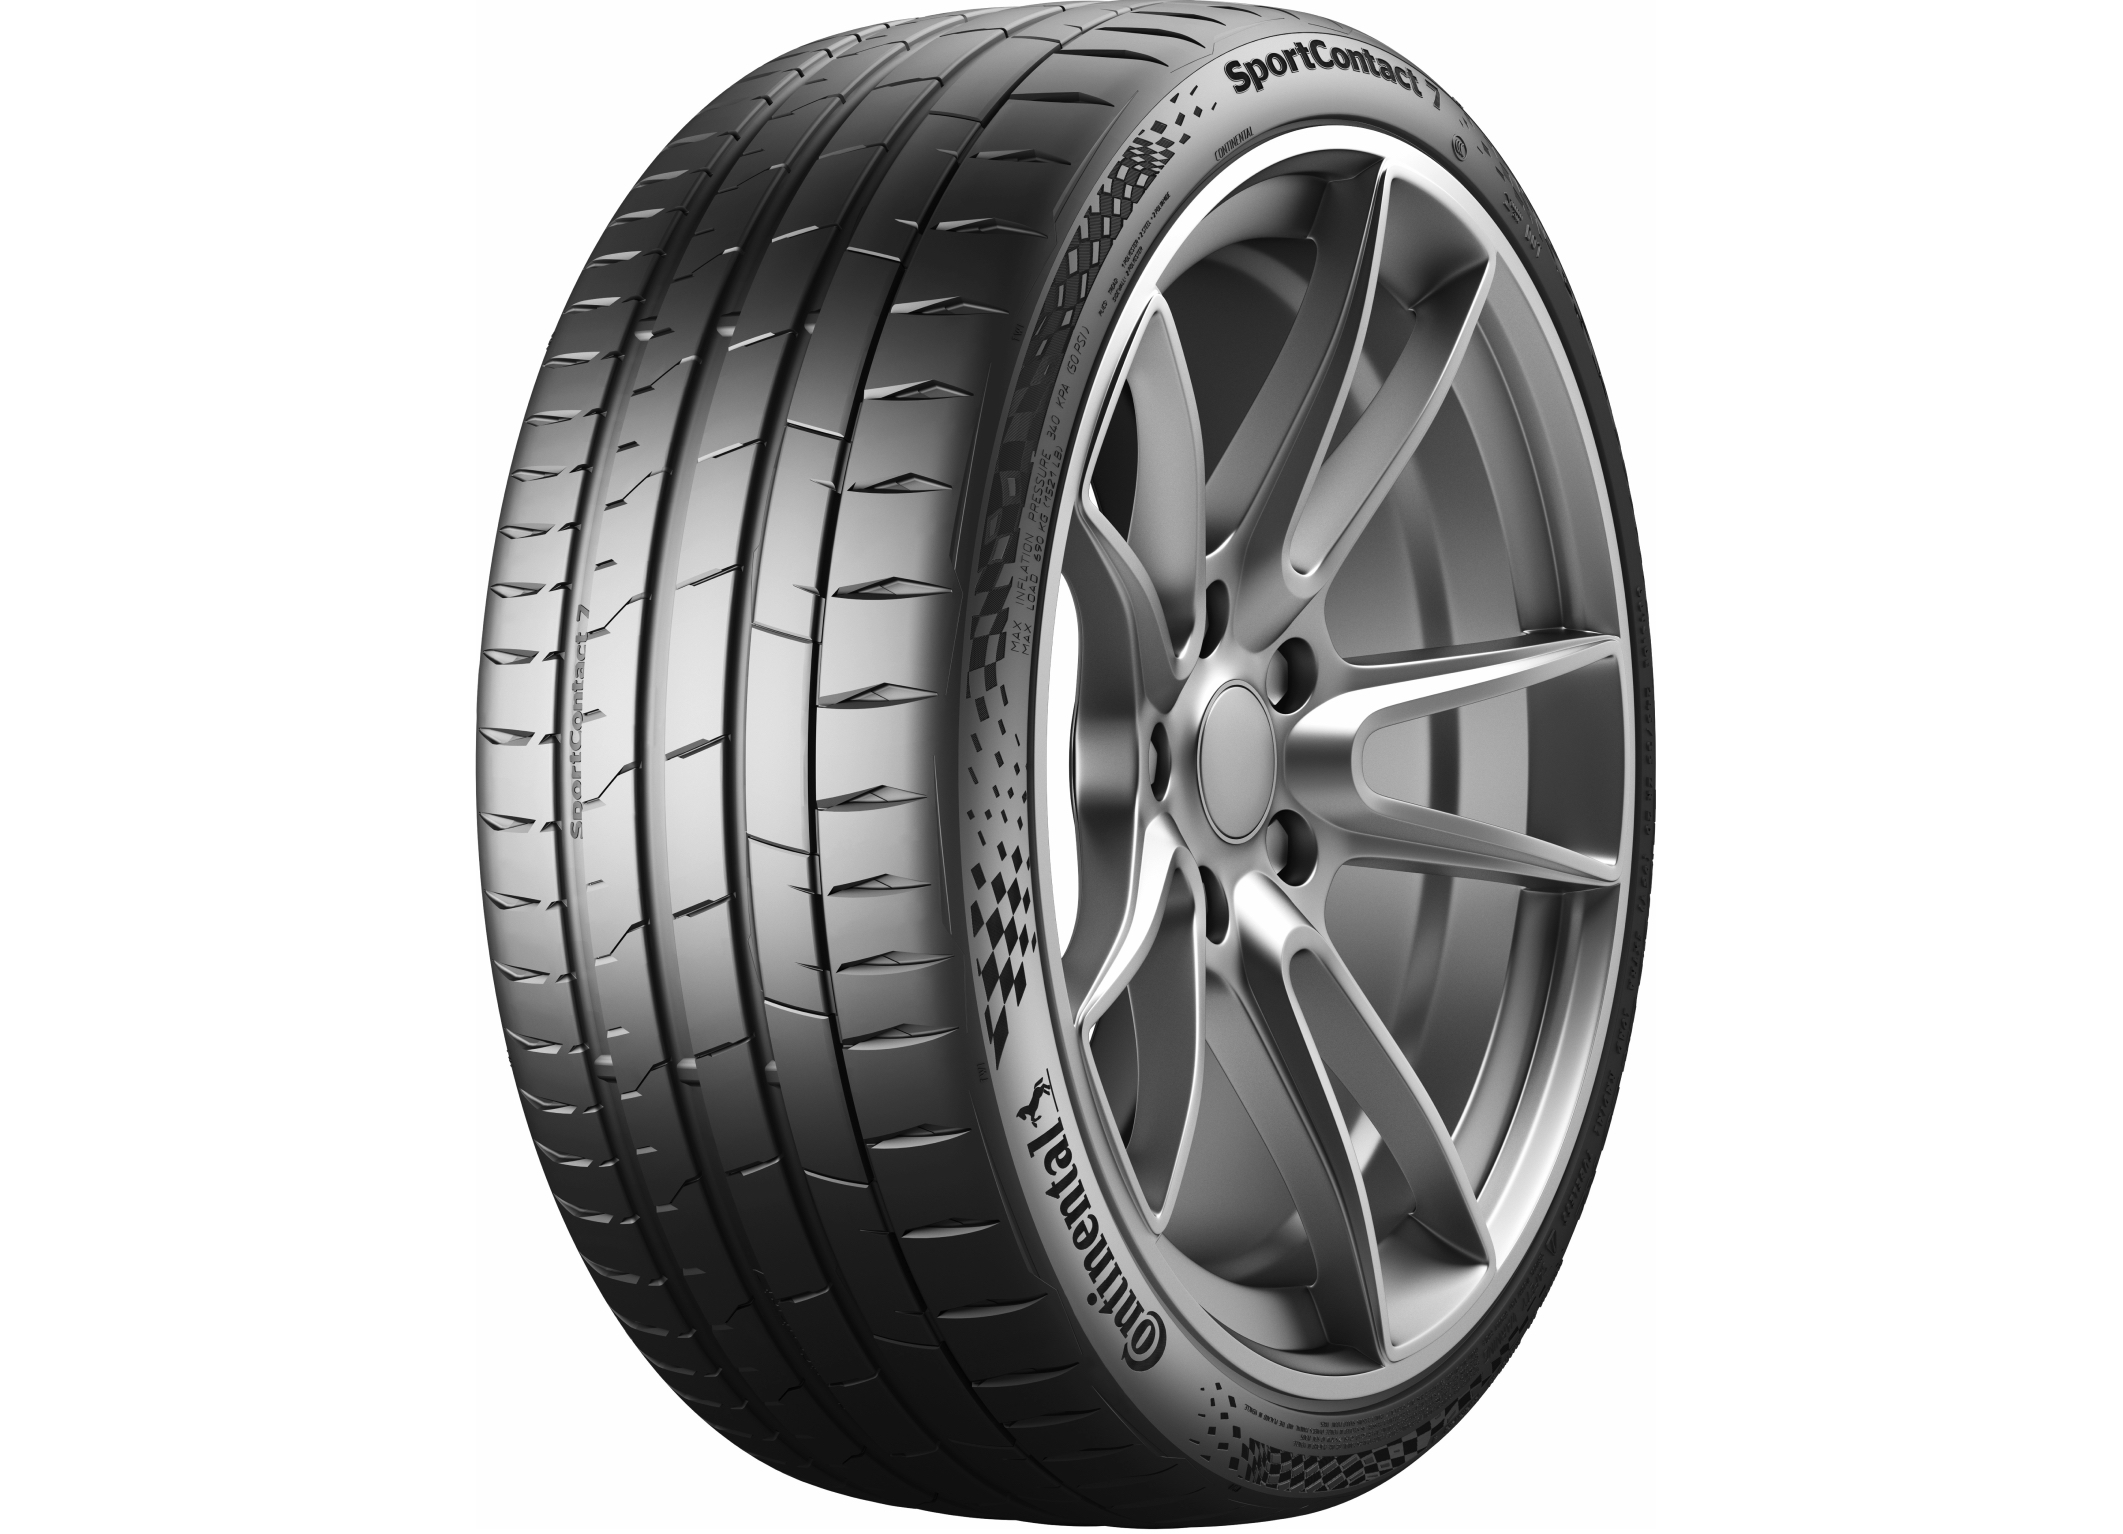 Continental is the exclusive tire the supplier AG for Continental - powerful yet most Brabus supercar